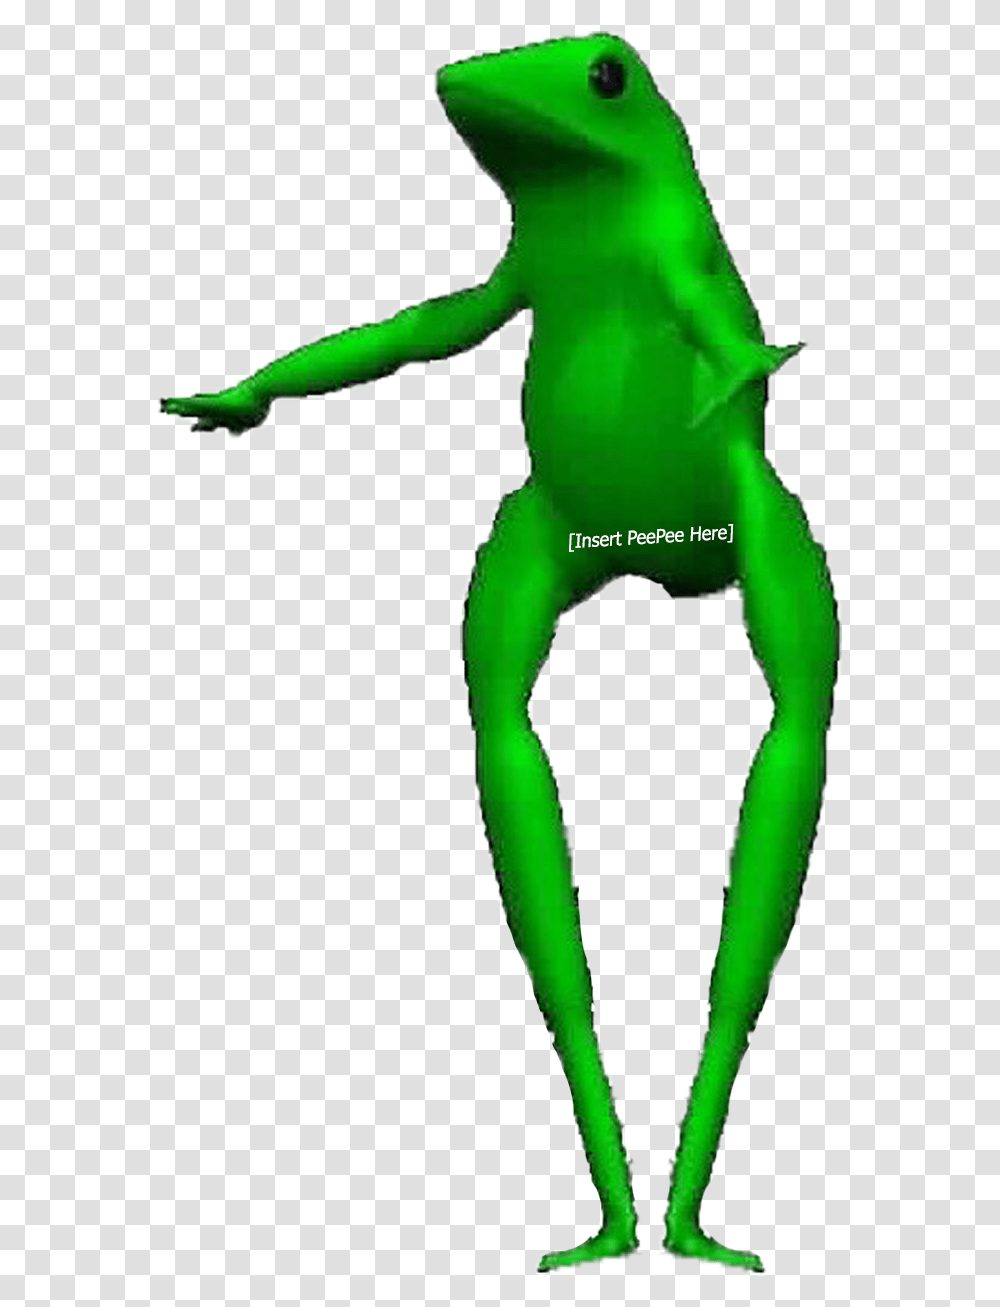 Boi Frog Frog Riding A Unicycle Gif, Green, Animal, Reptile, Amphibian Transparent Png